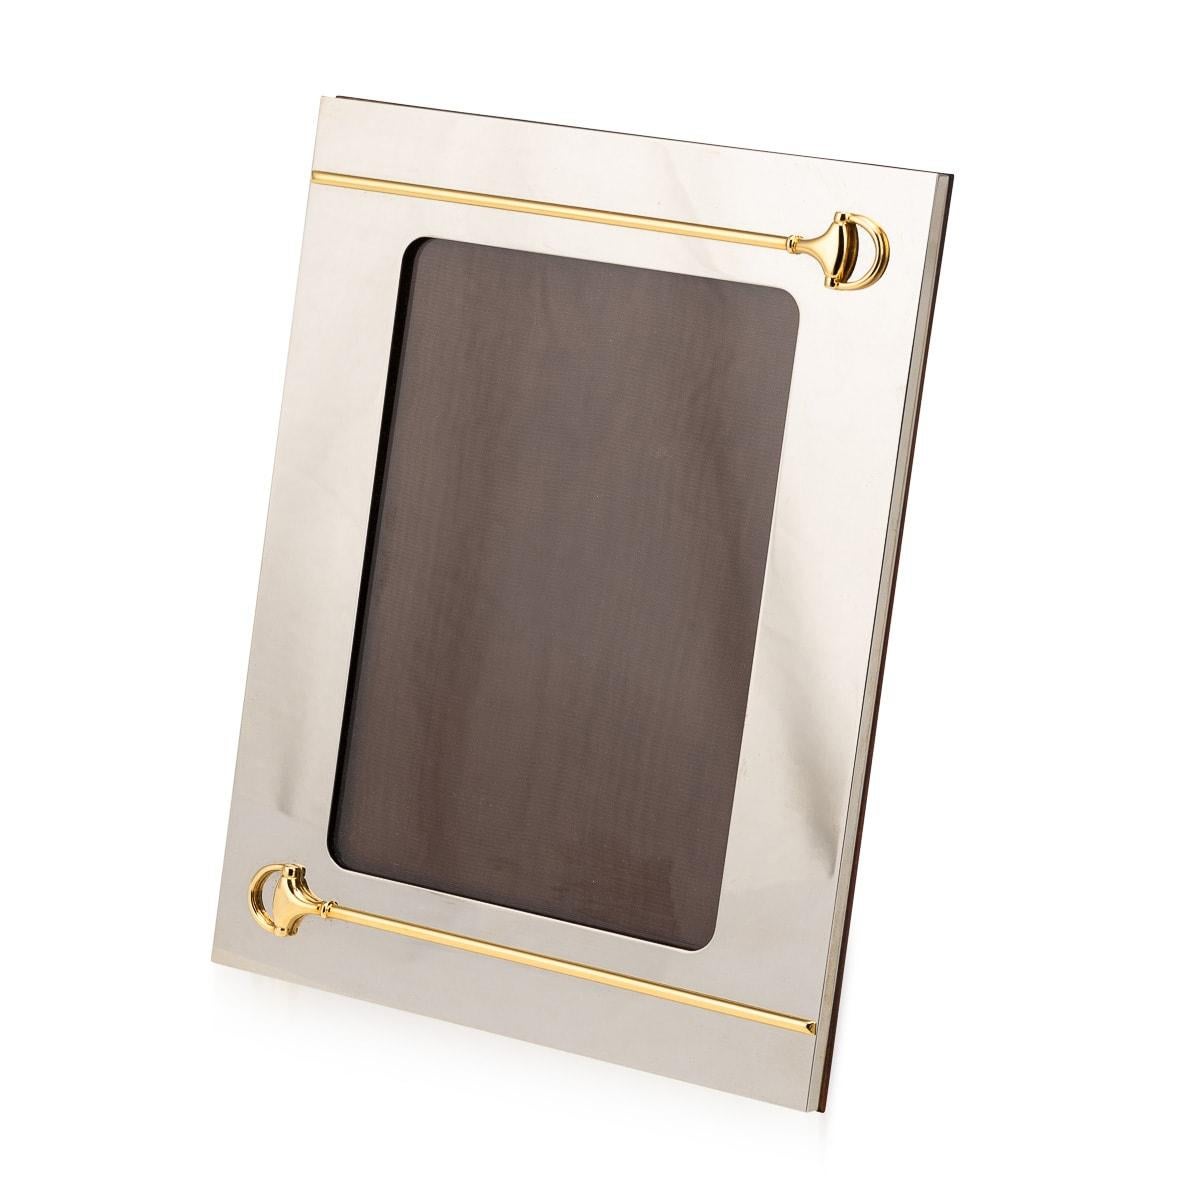 Enhance your cherished memories with this Gucci photograph frame in silver plate, crafted in Italy circa 1980. Its timeless elegance and versatile design, allowing for both vertical and horizontal display, make it a sophisticated showcase for your